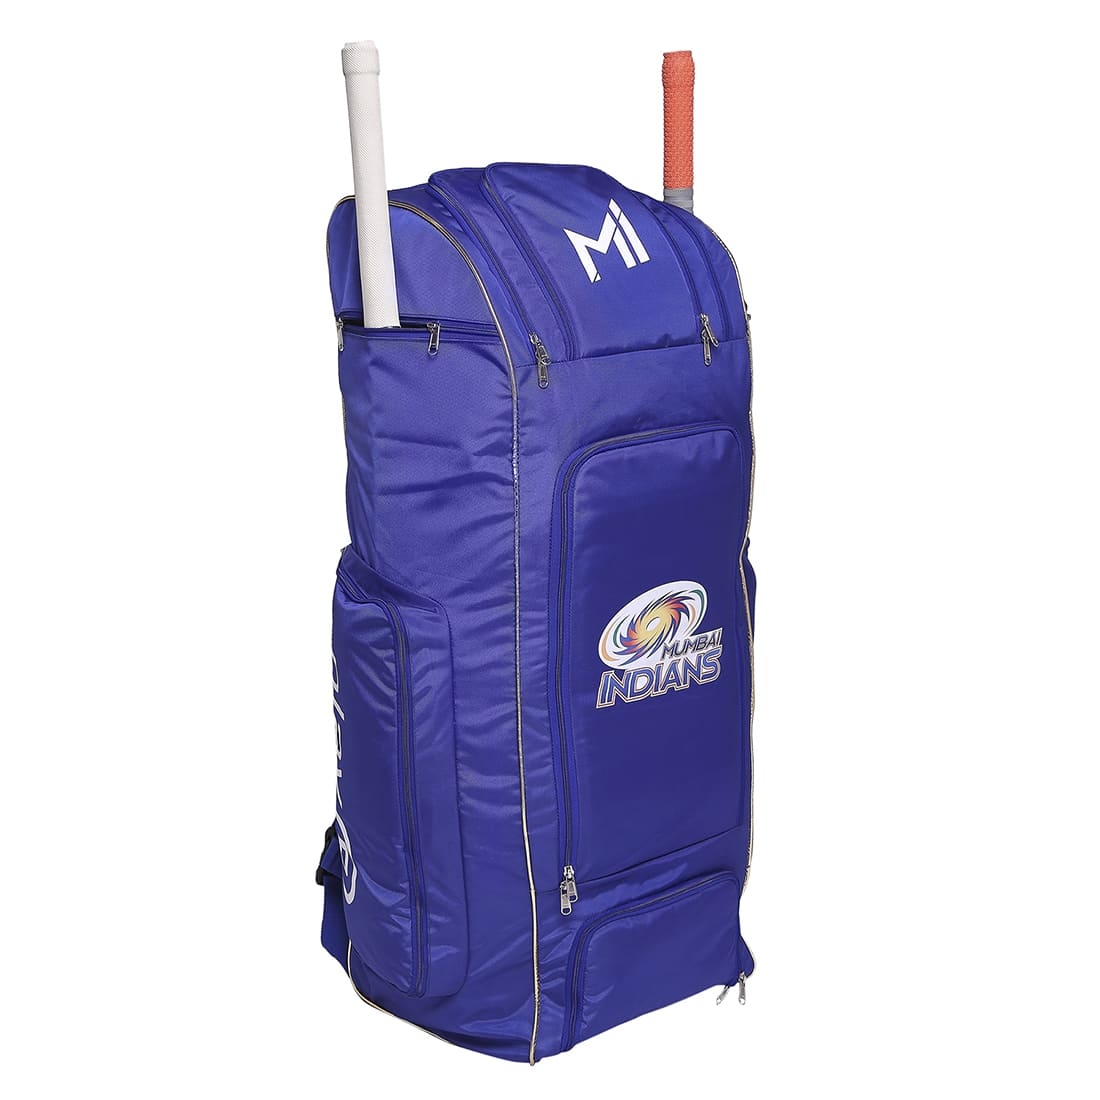 Cricket Bags - Buy Cricket Kit Bags for Senior & Junior Cricketers – Sturdy  Sports